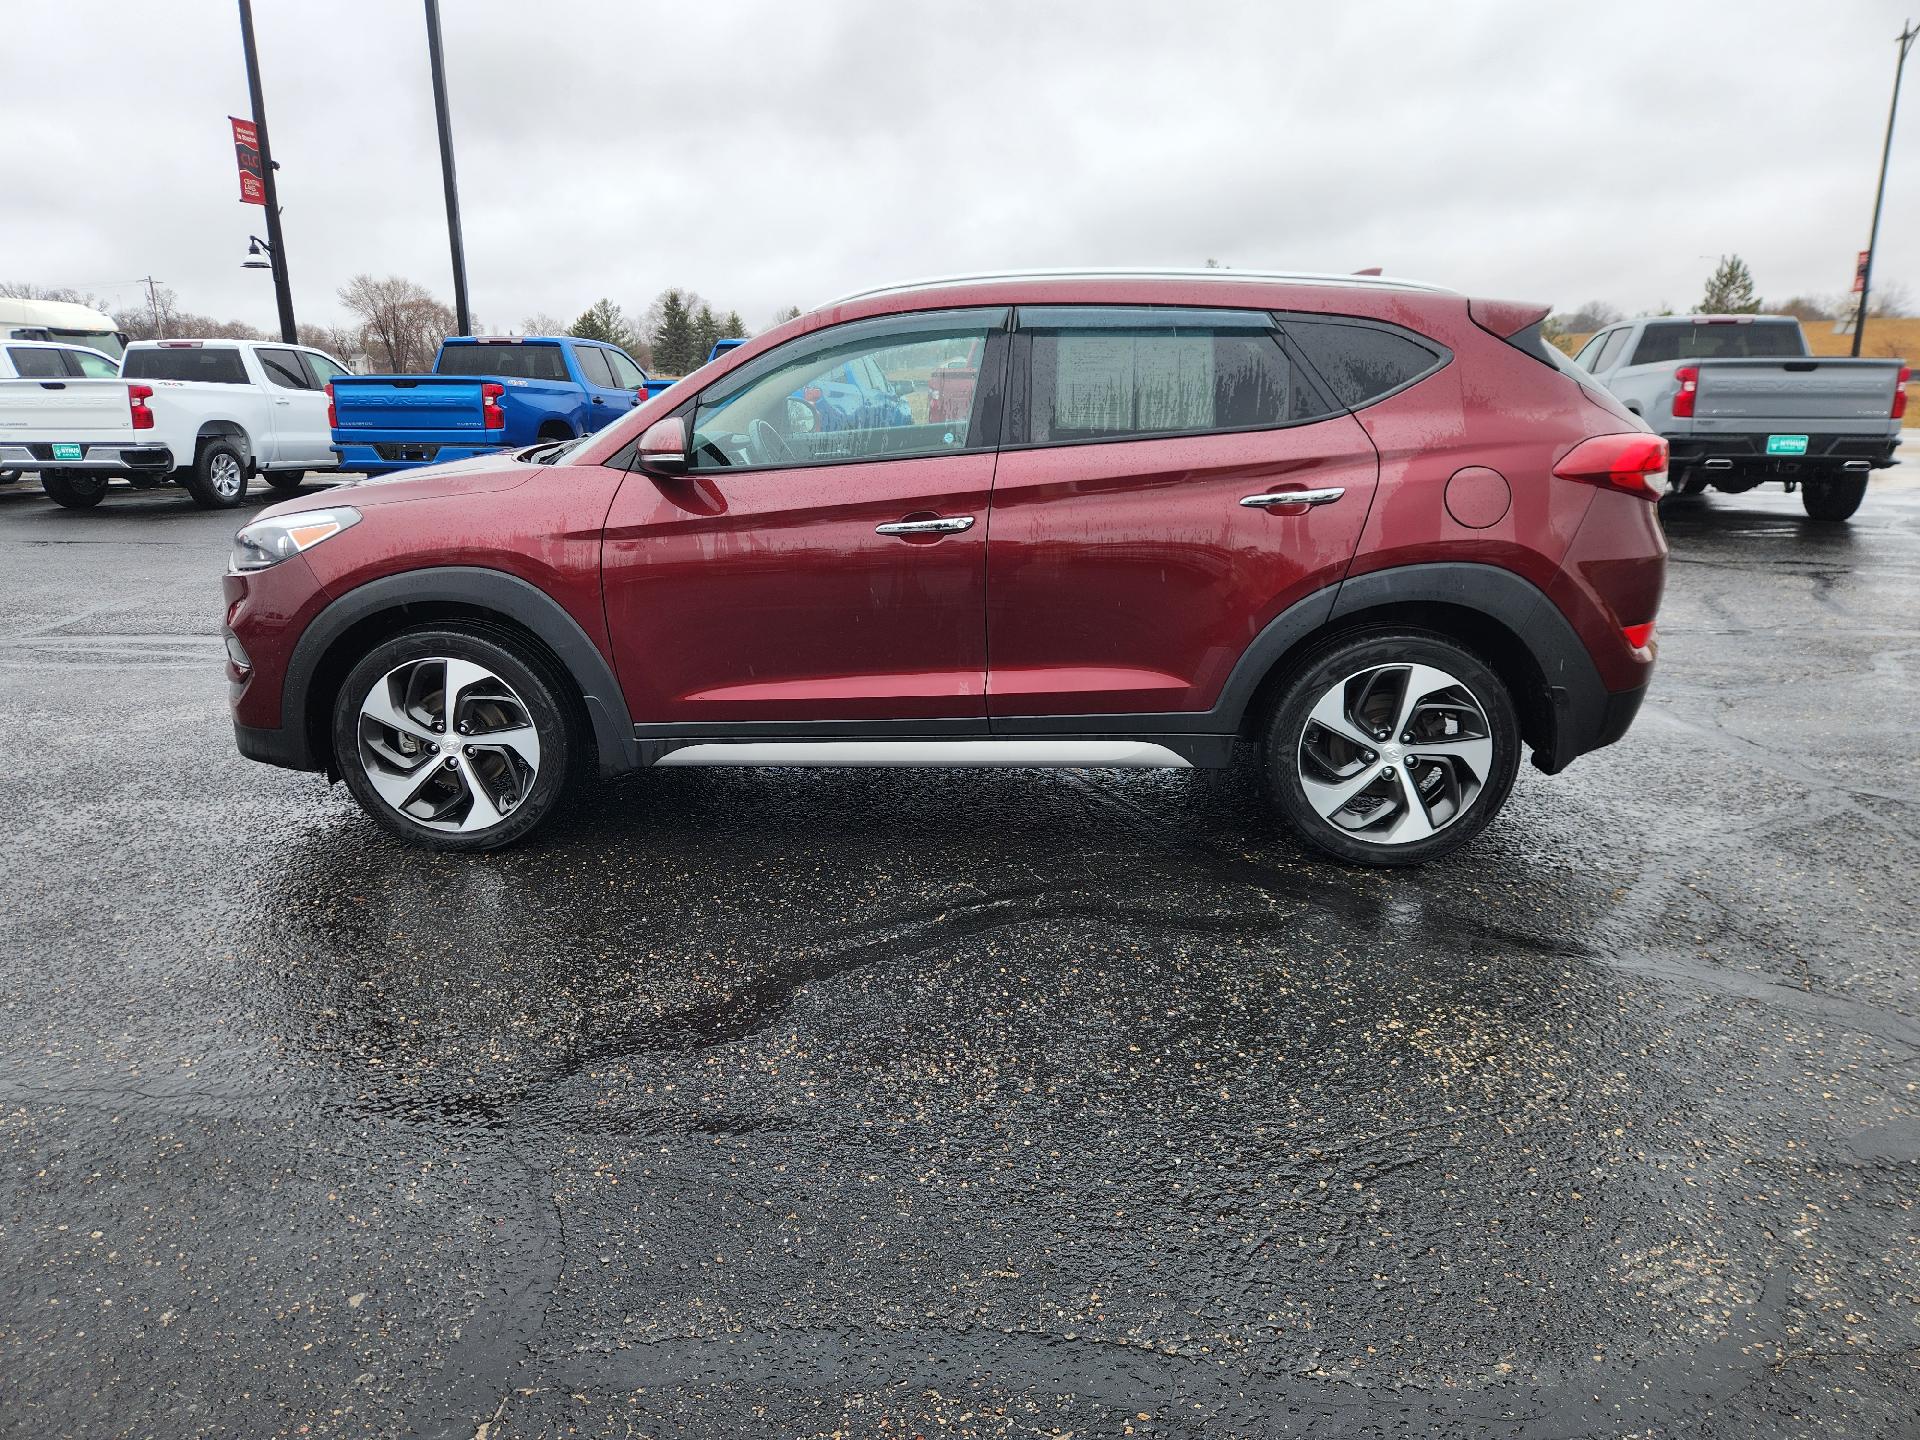 Used 2017 Hyundai Tucson Limited with VIN KM8J3CA29HU313142 for sale in Staples, Minnesota